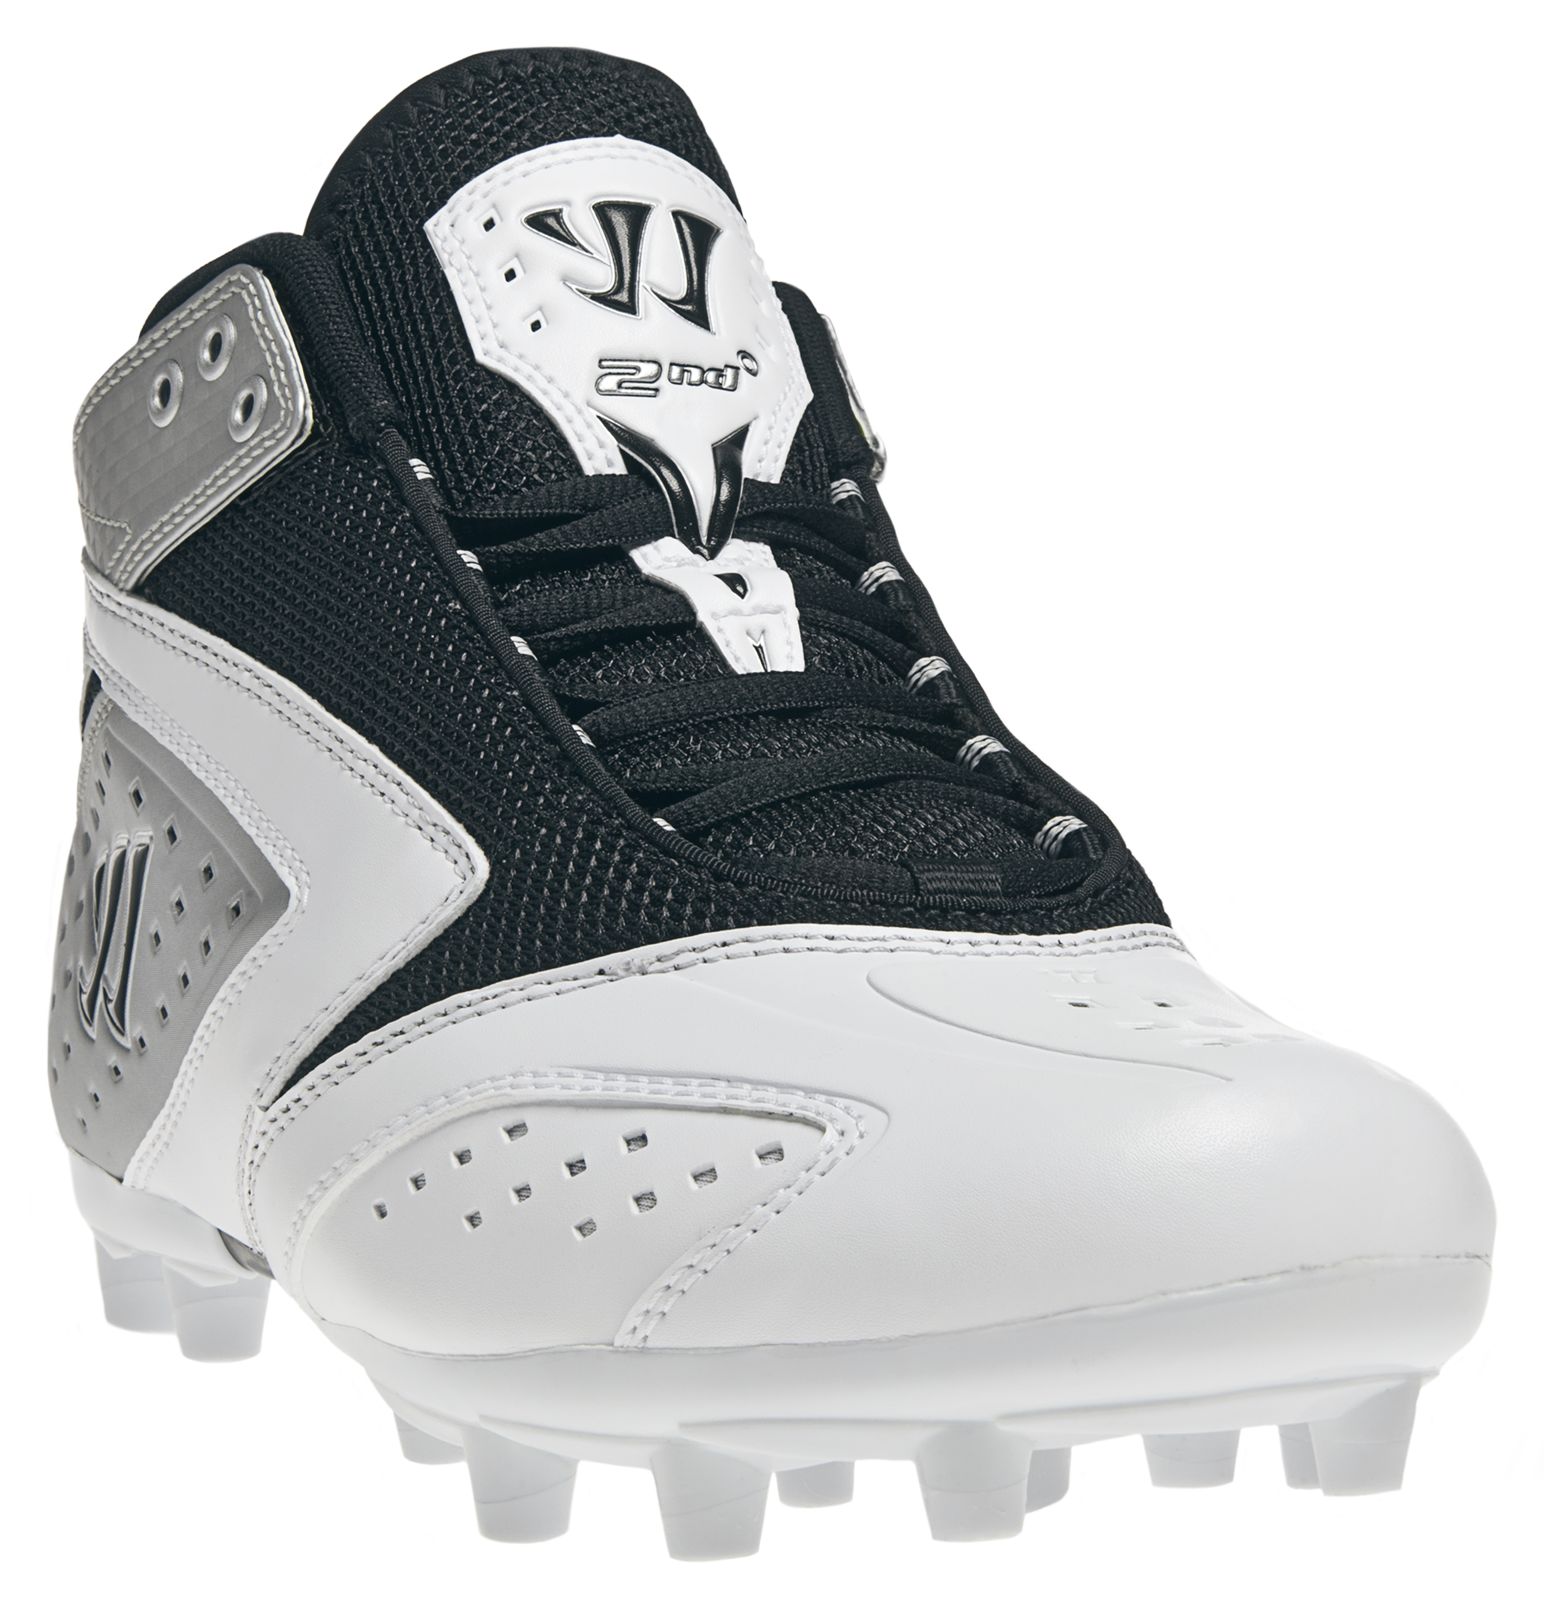 Burn 2nd Degree Cleat, White with Black & Silver image number 2